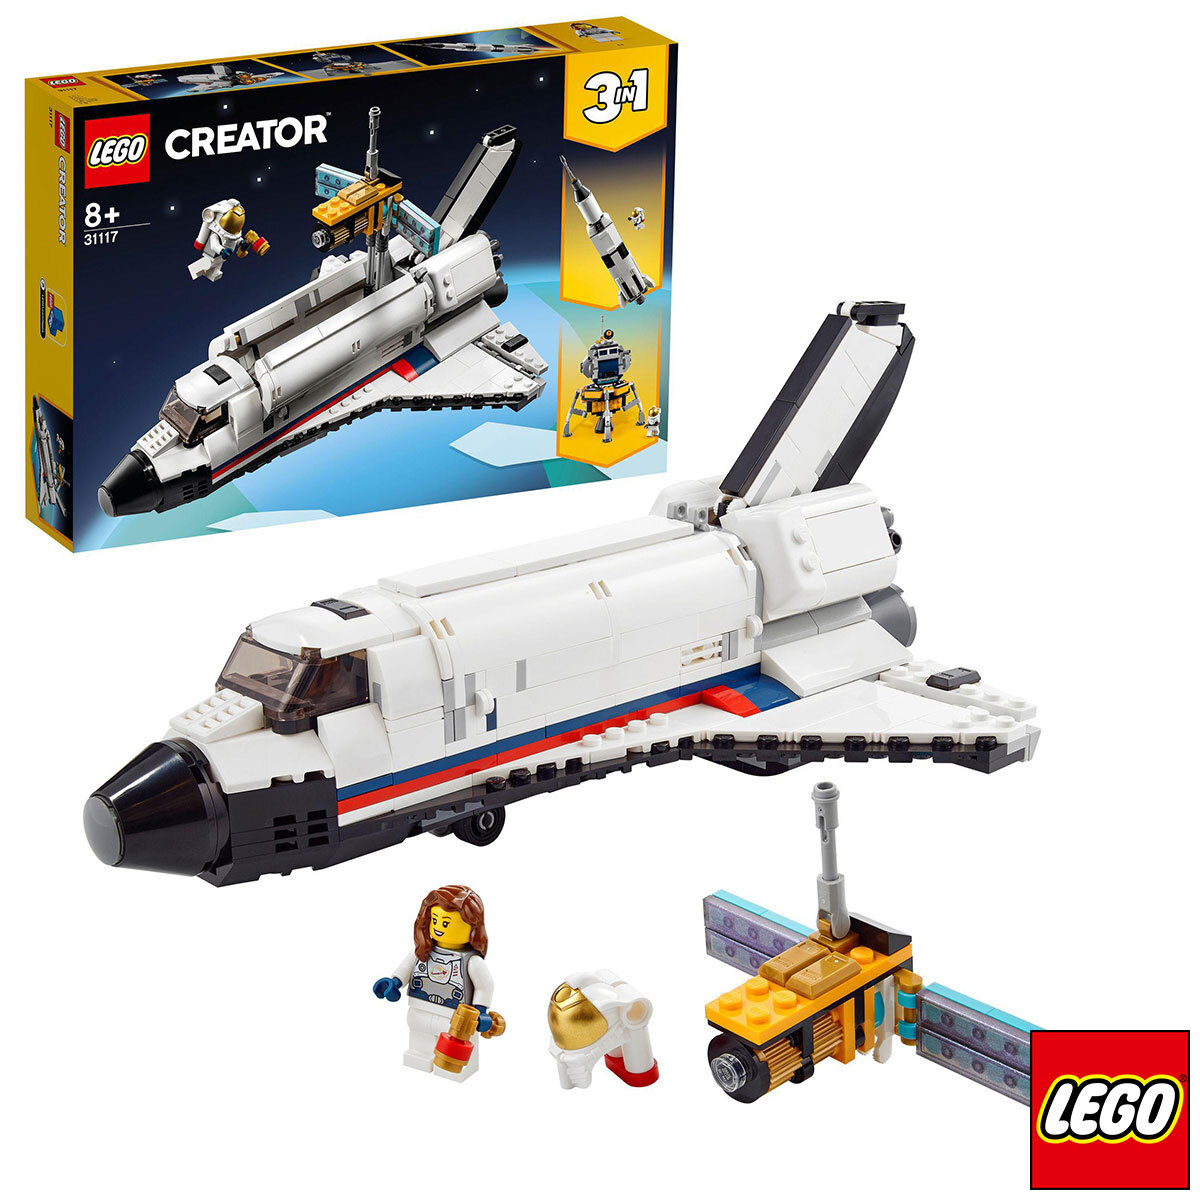 Buy LEGO Creator Space Shuttle Adventure Box & Product Image at costco.co.uk